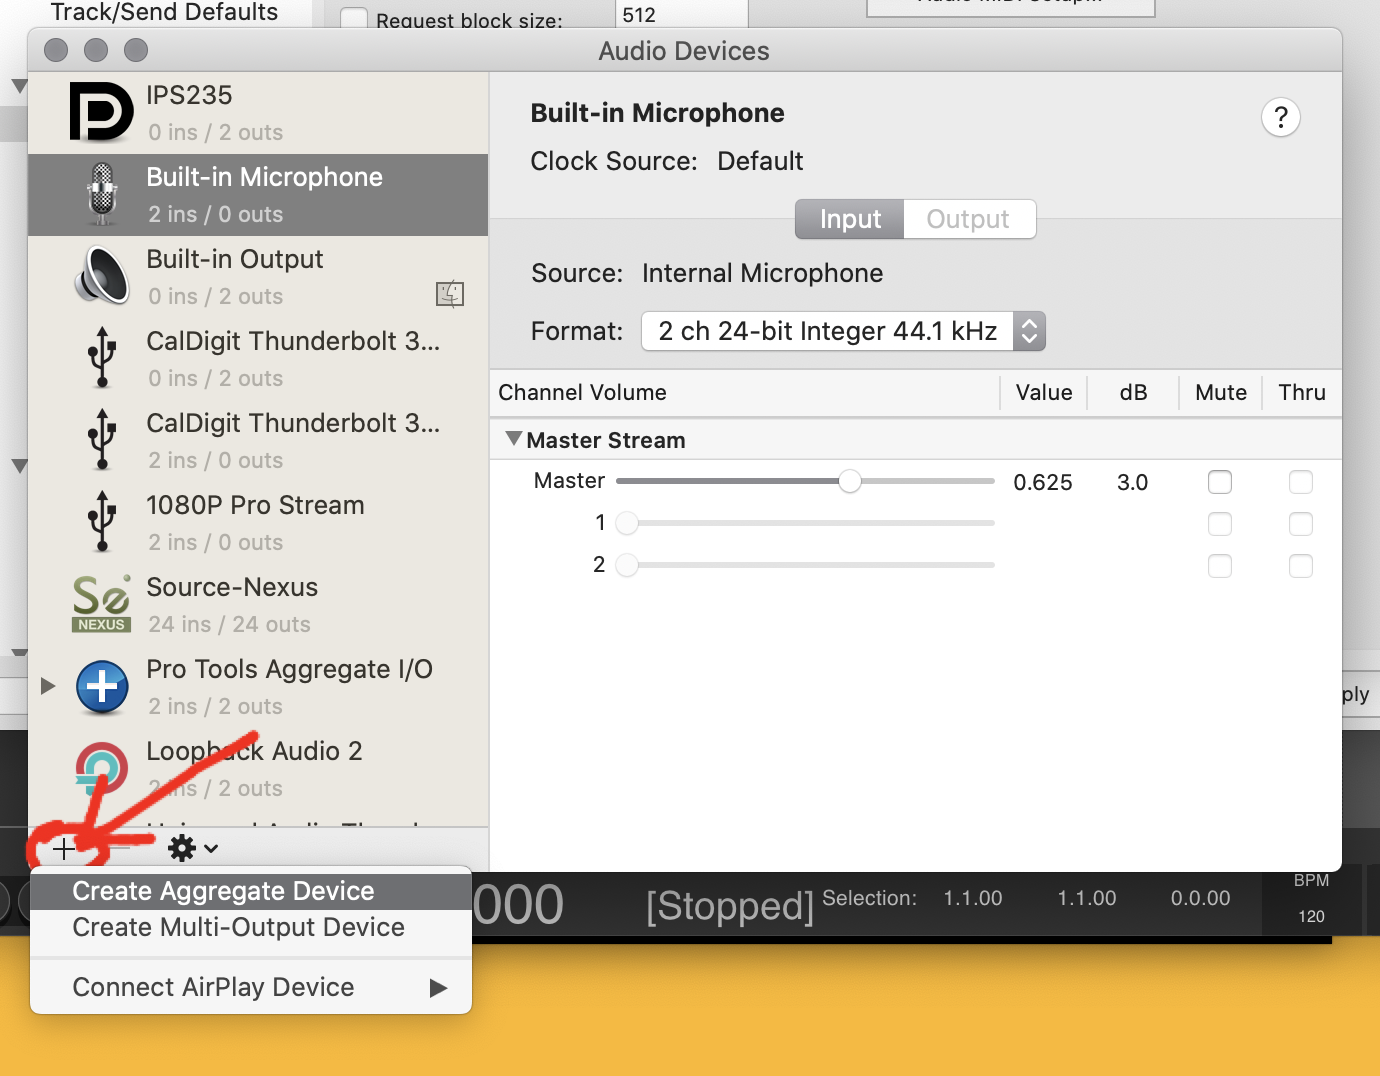 Example of how to add an aggregate device on macOS